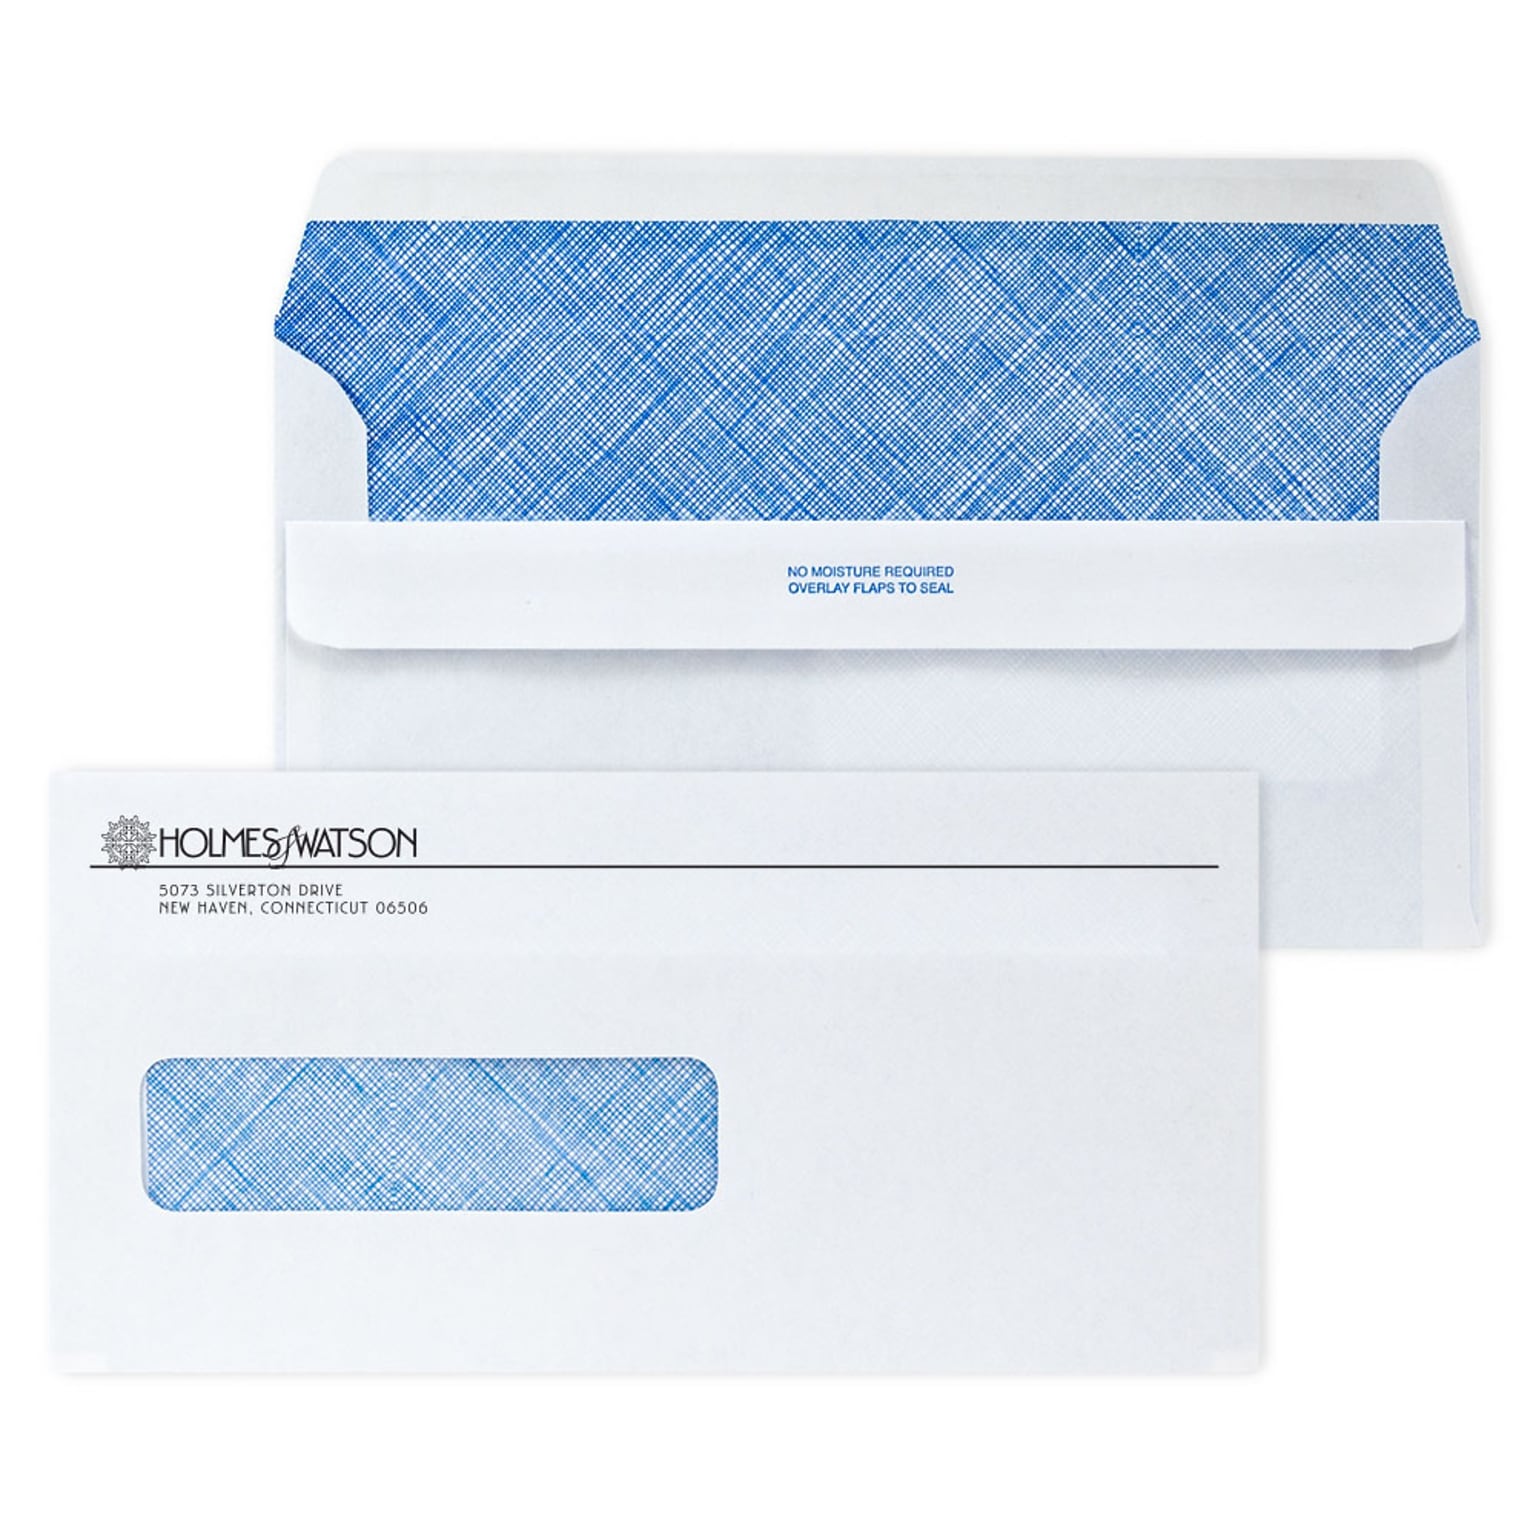 Custom 4-1/2 x 9 Insurance Claim Self Seal Window Envelopes with Security Tint, 24# White Wove, 1 Standard Ink, 250 / Pack